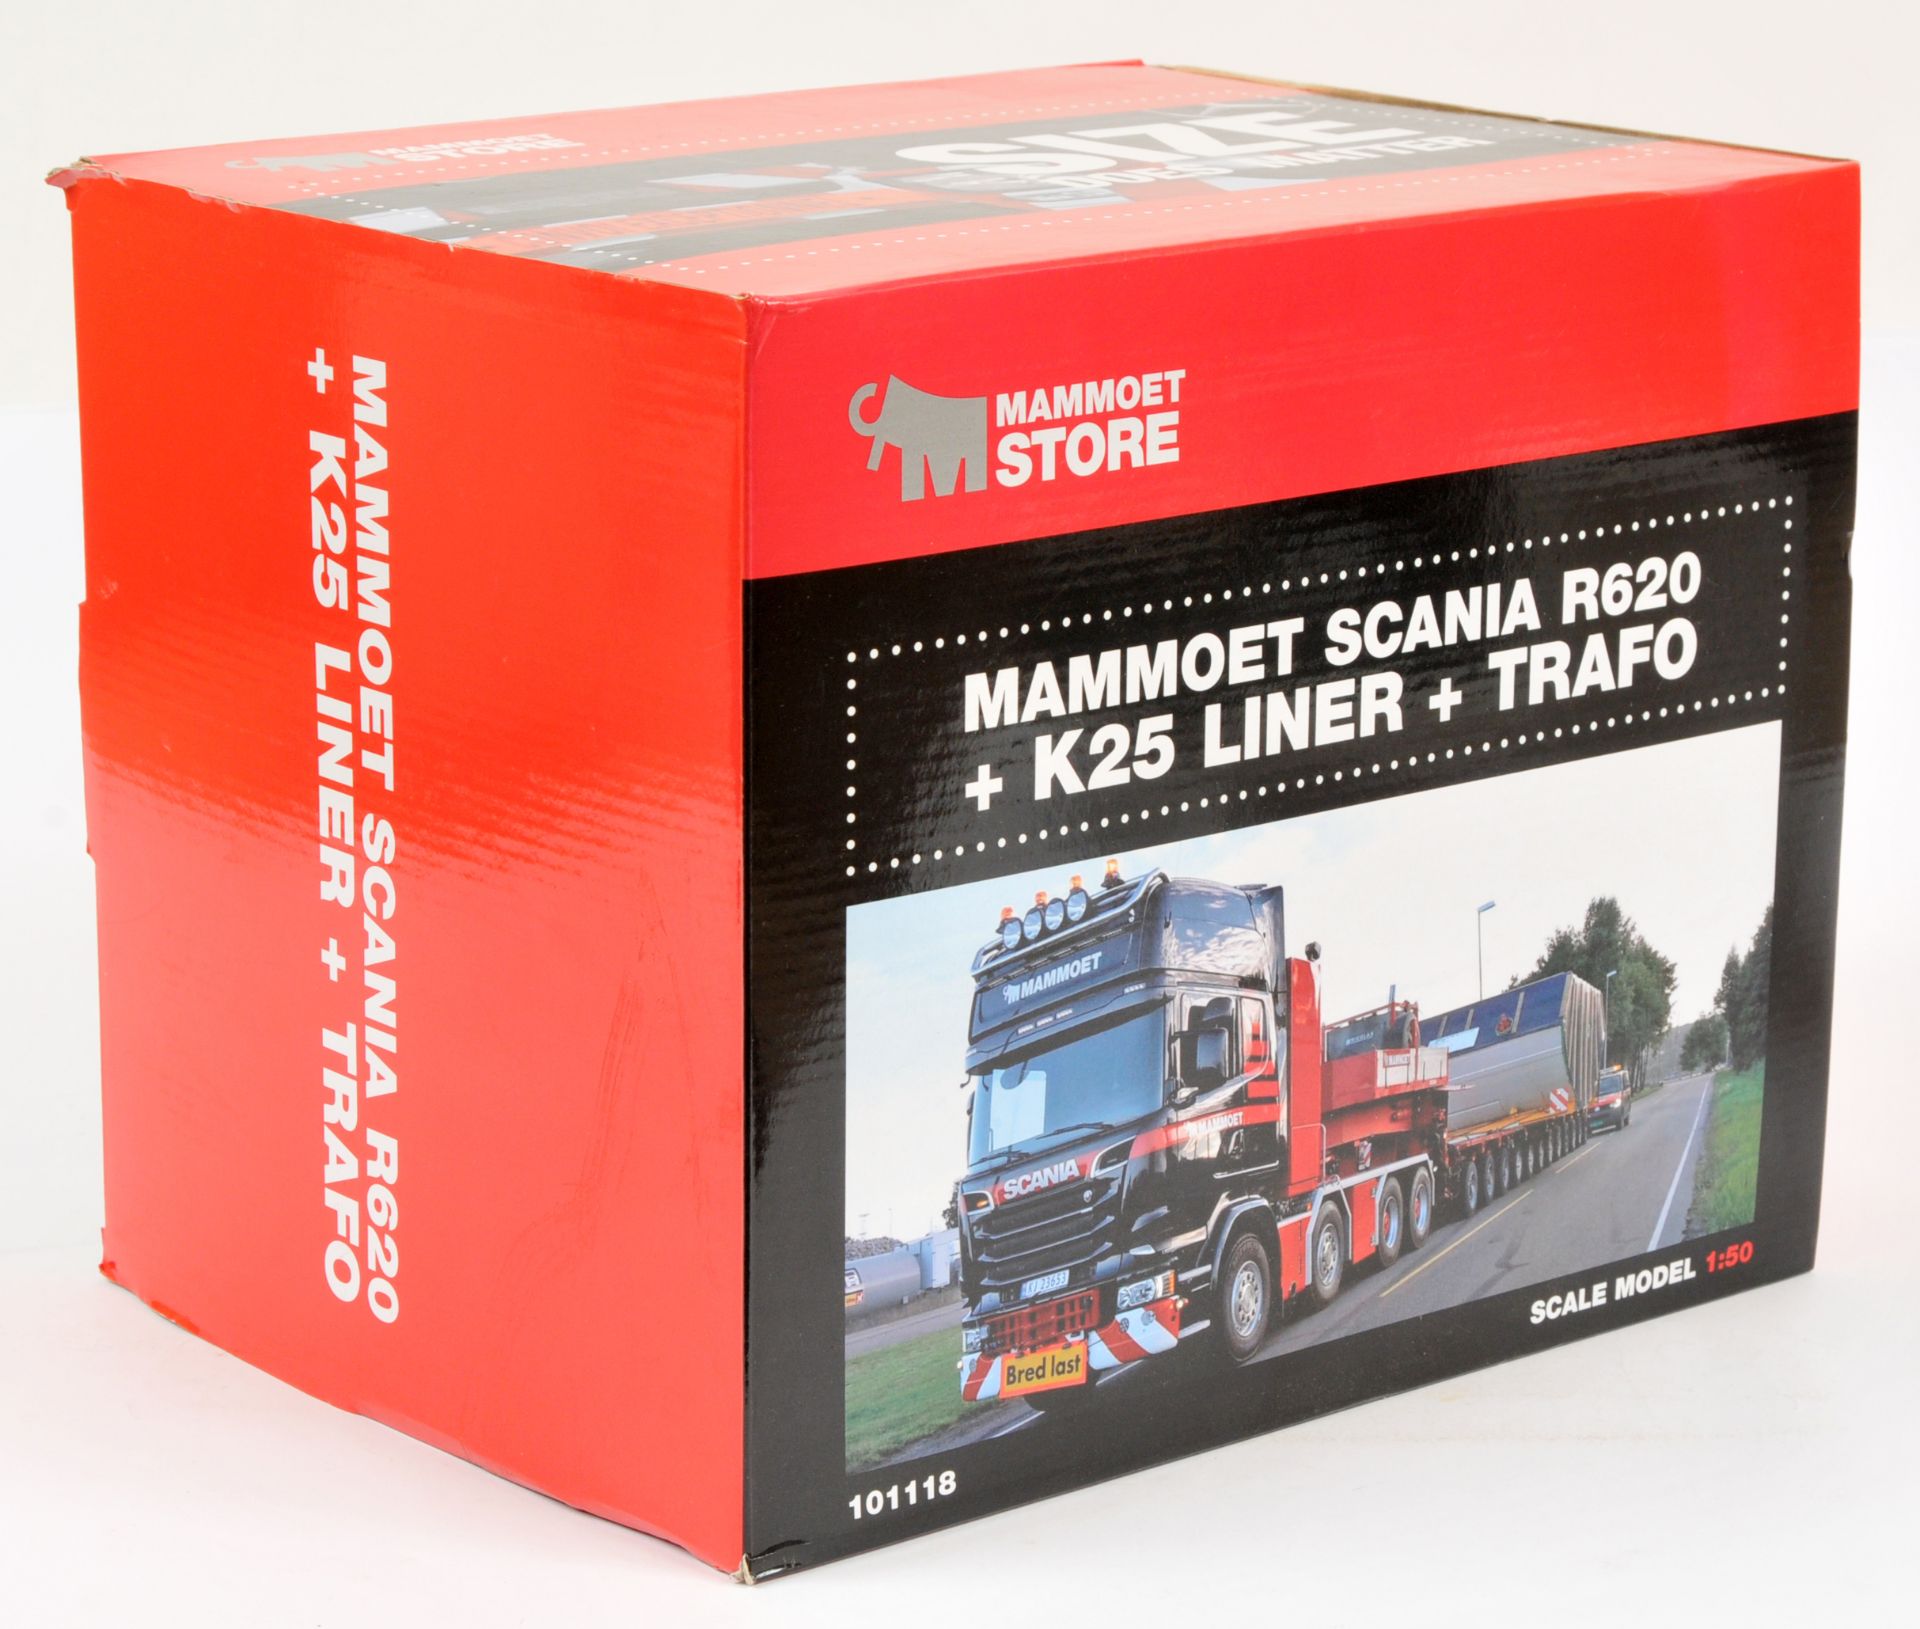 IMC Models (1/50th) 31-0102 "Mammoet" Scania R620   - Red and black - Mint in a Sealed Polystyren...